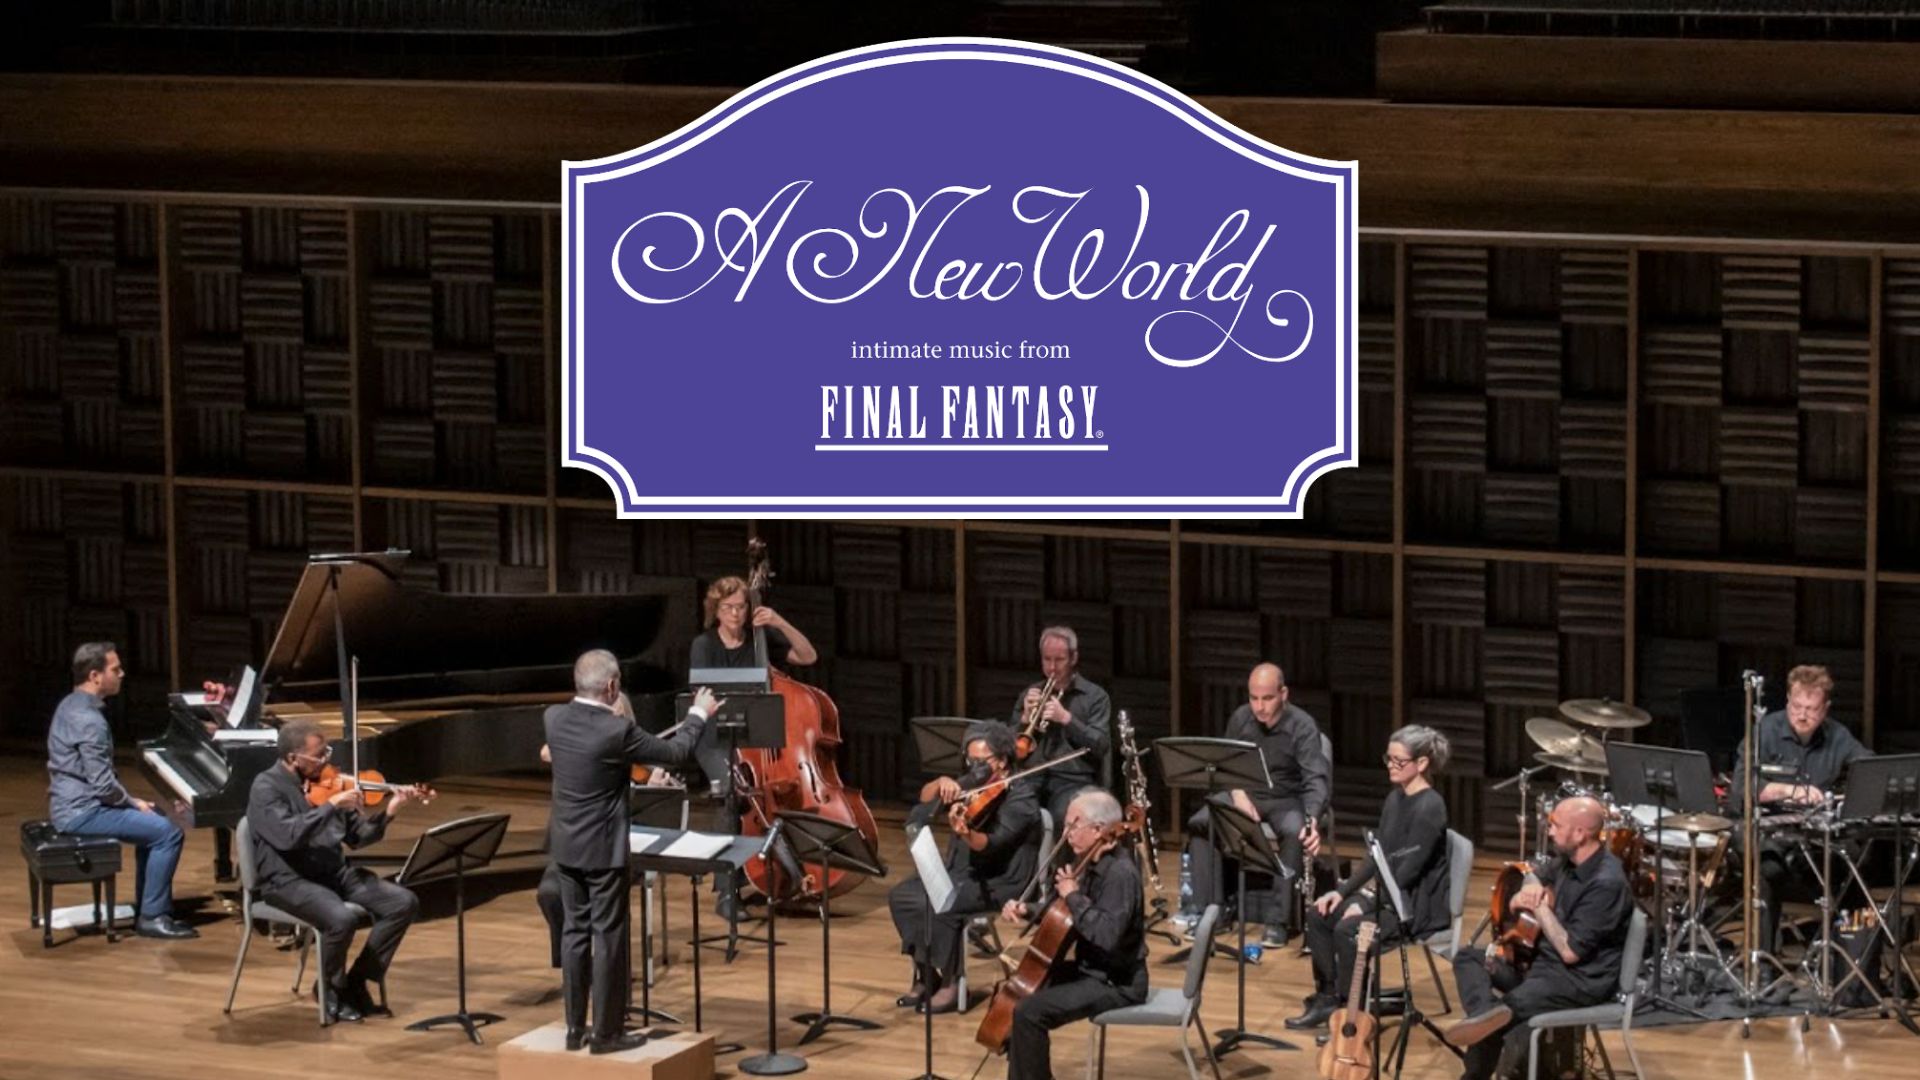 A New World intimate music from FINAL FANTASY New Hazlett Theater